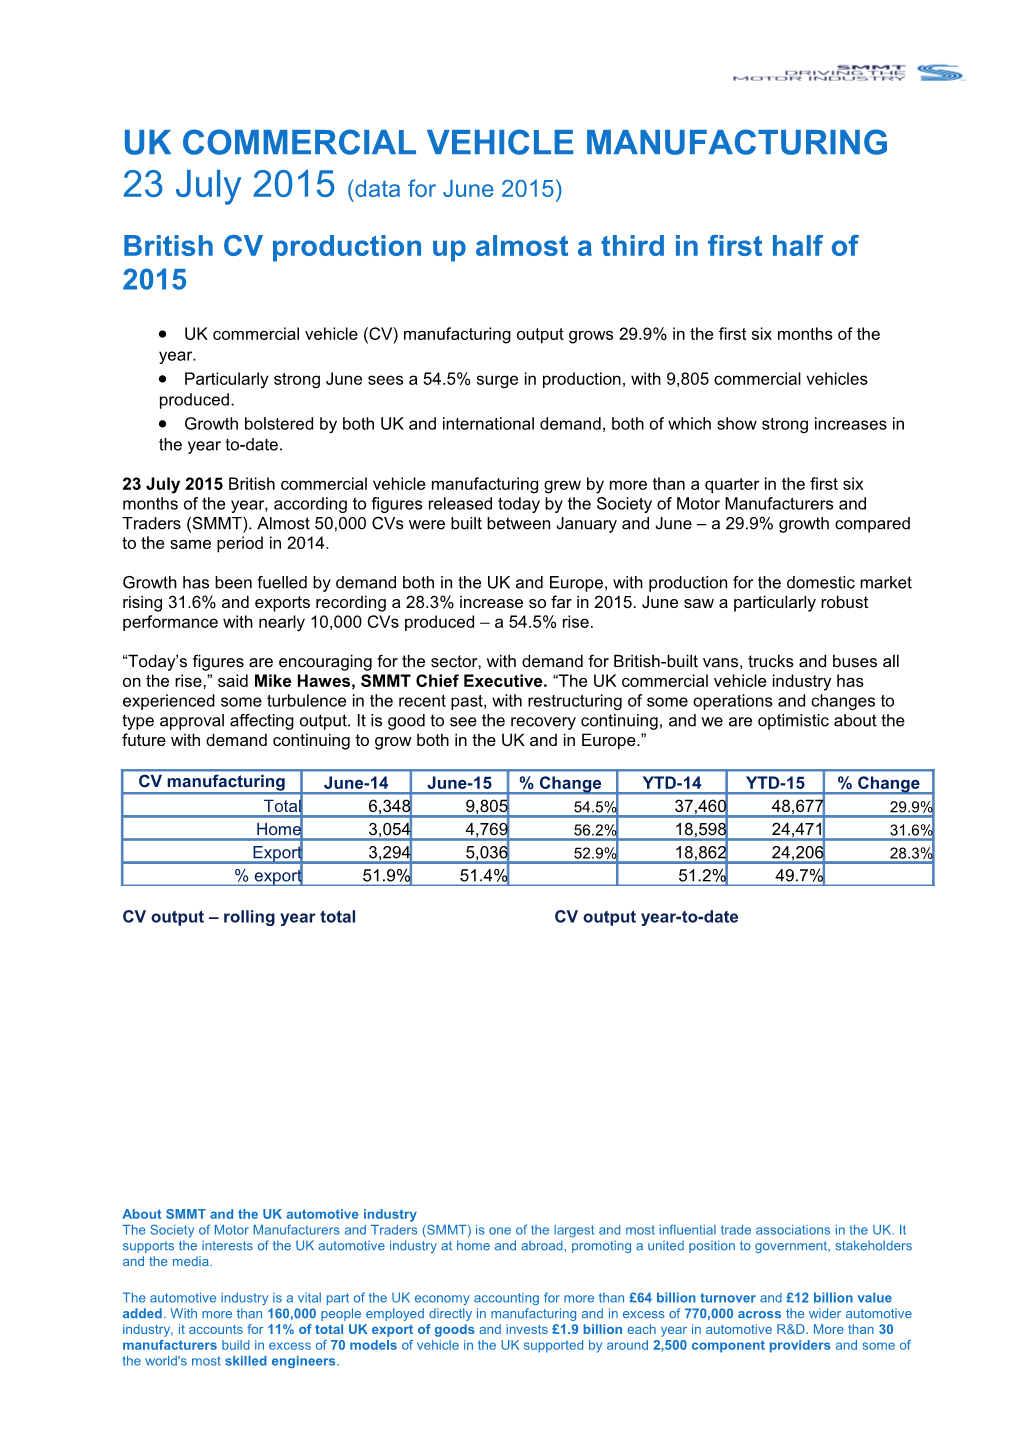 British CV Production up Almost a Third in First Half of 2015